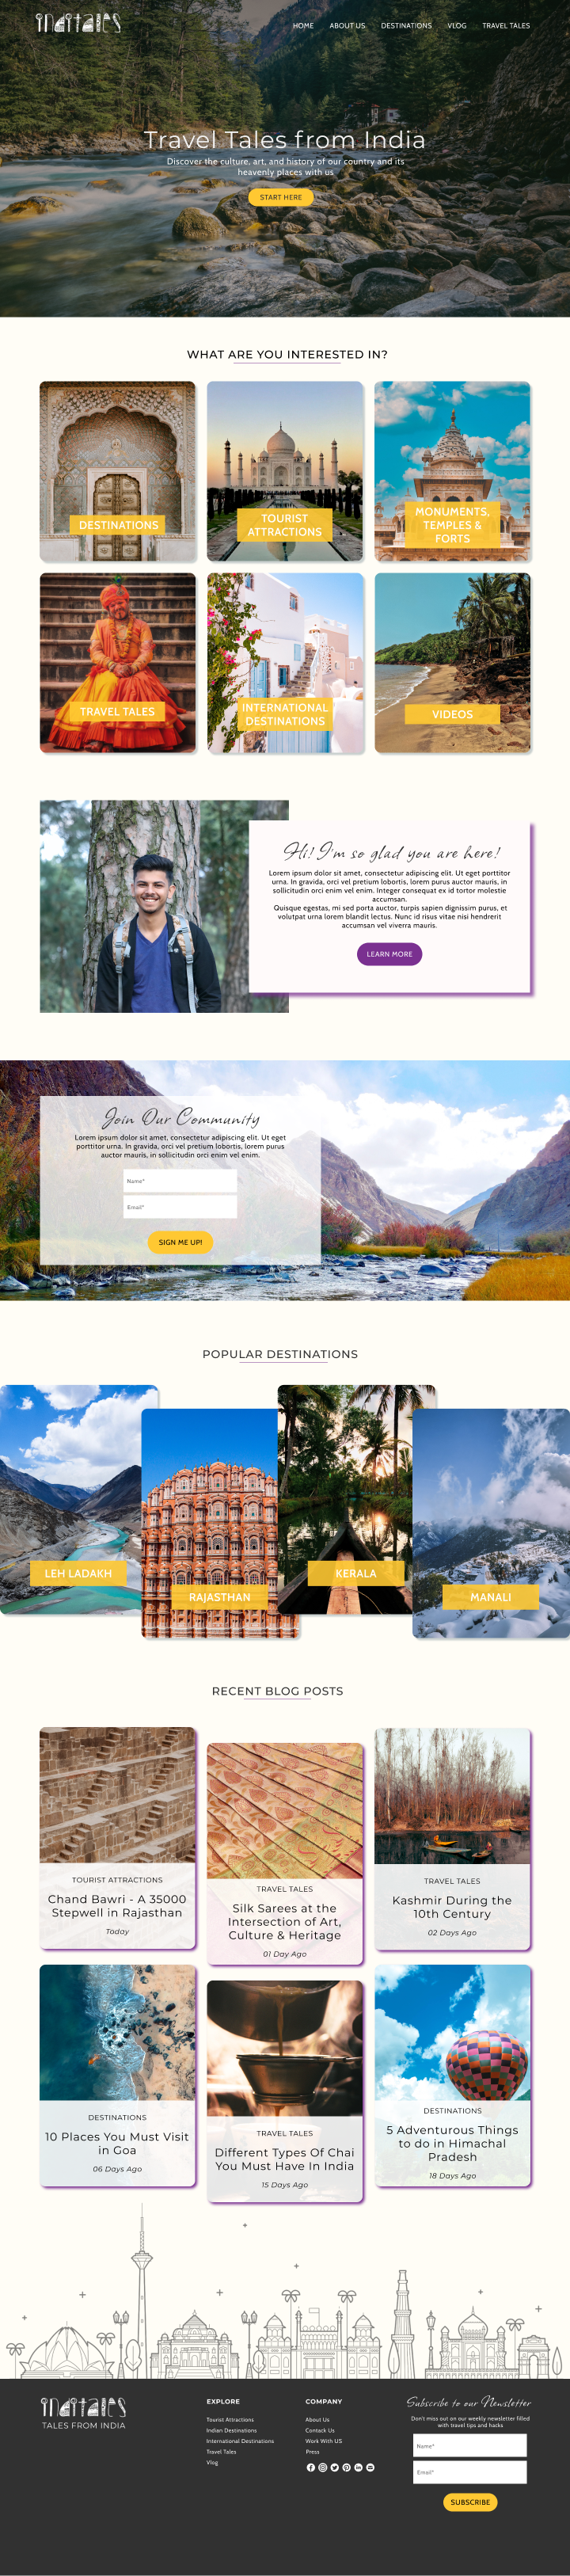 Re-design of an Indian Travel Blog. Designed in Figma.